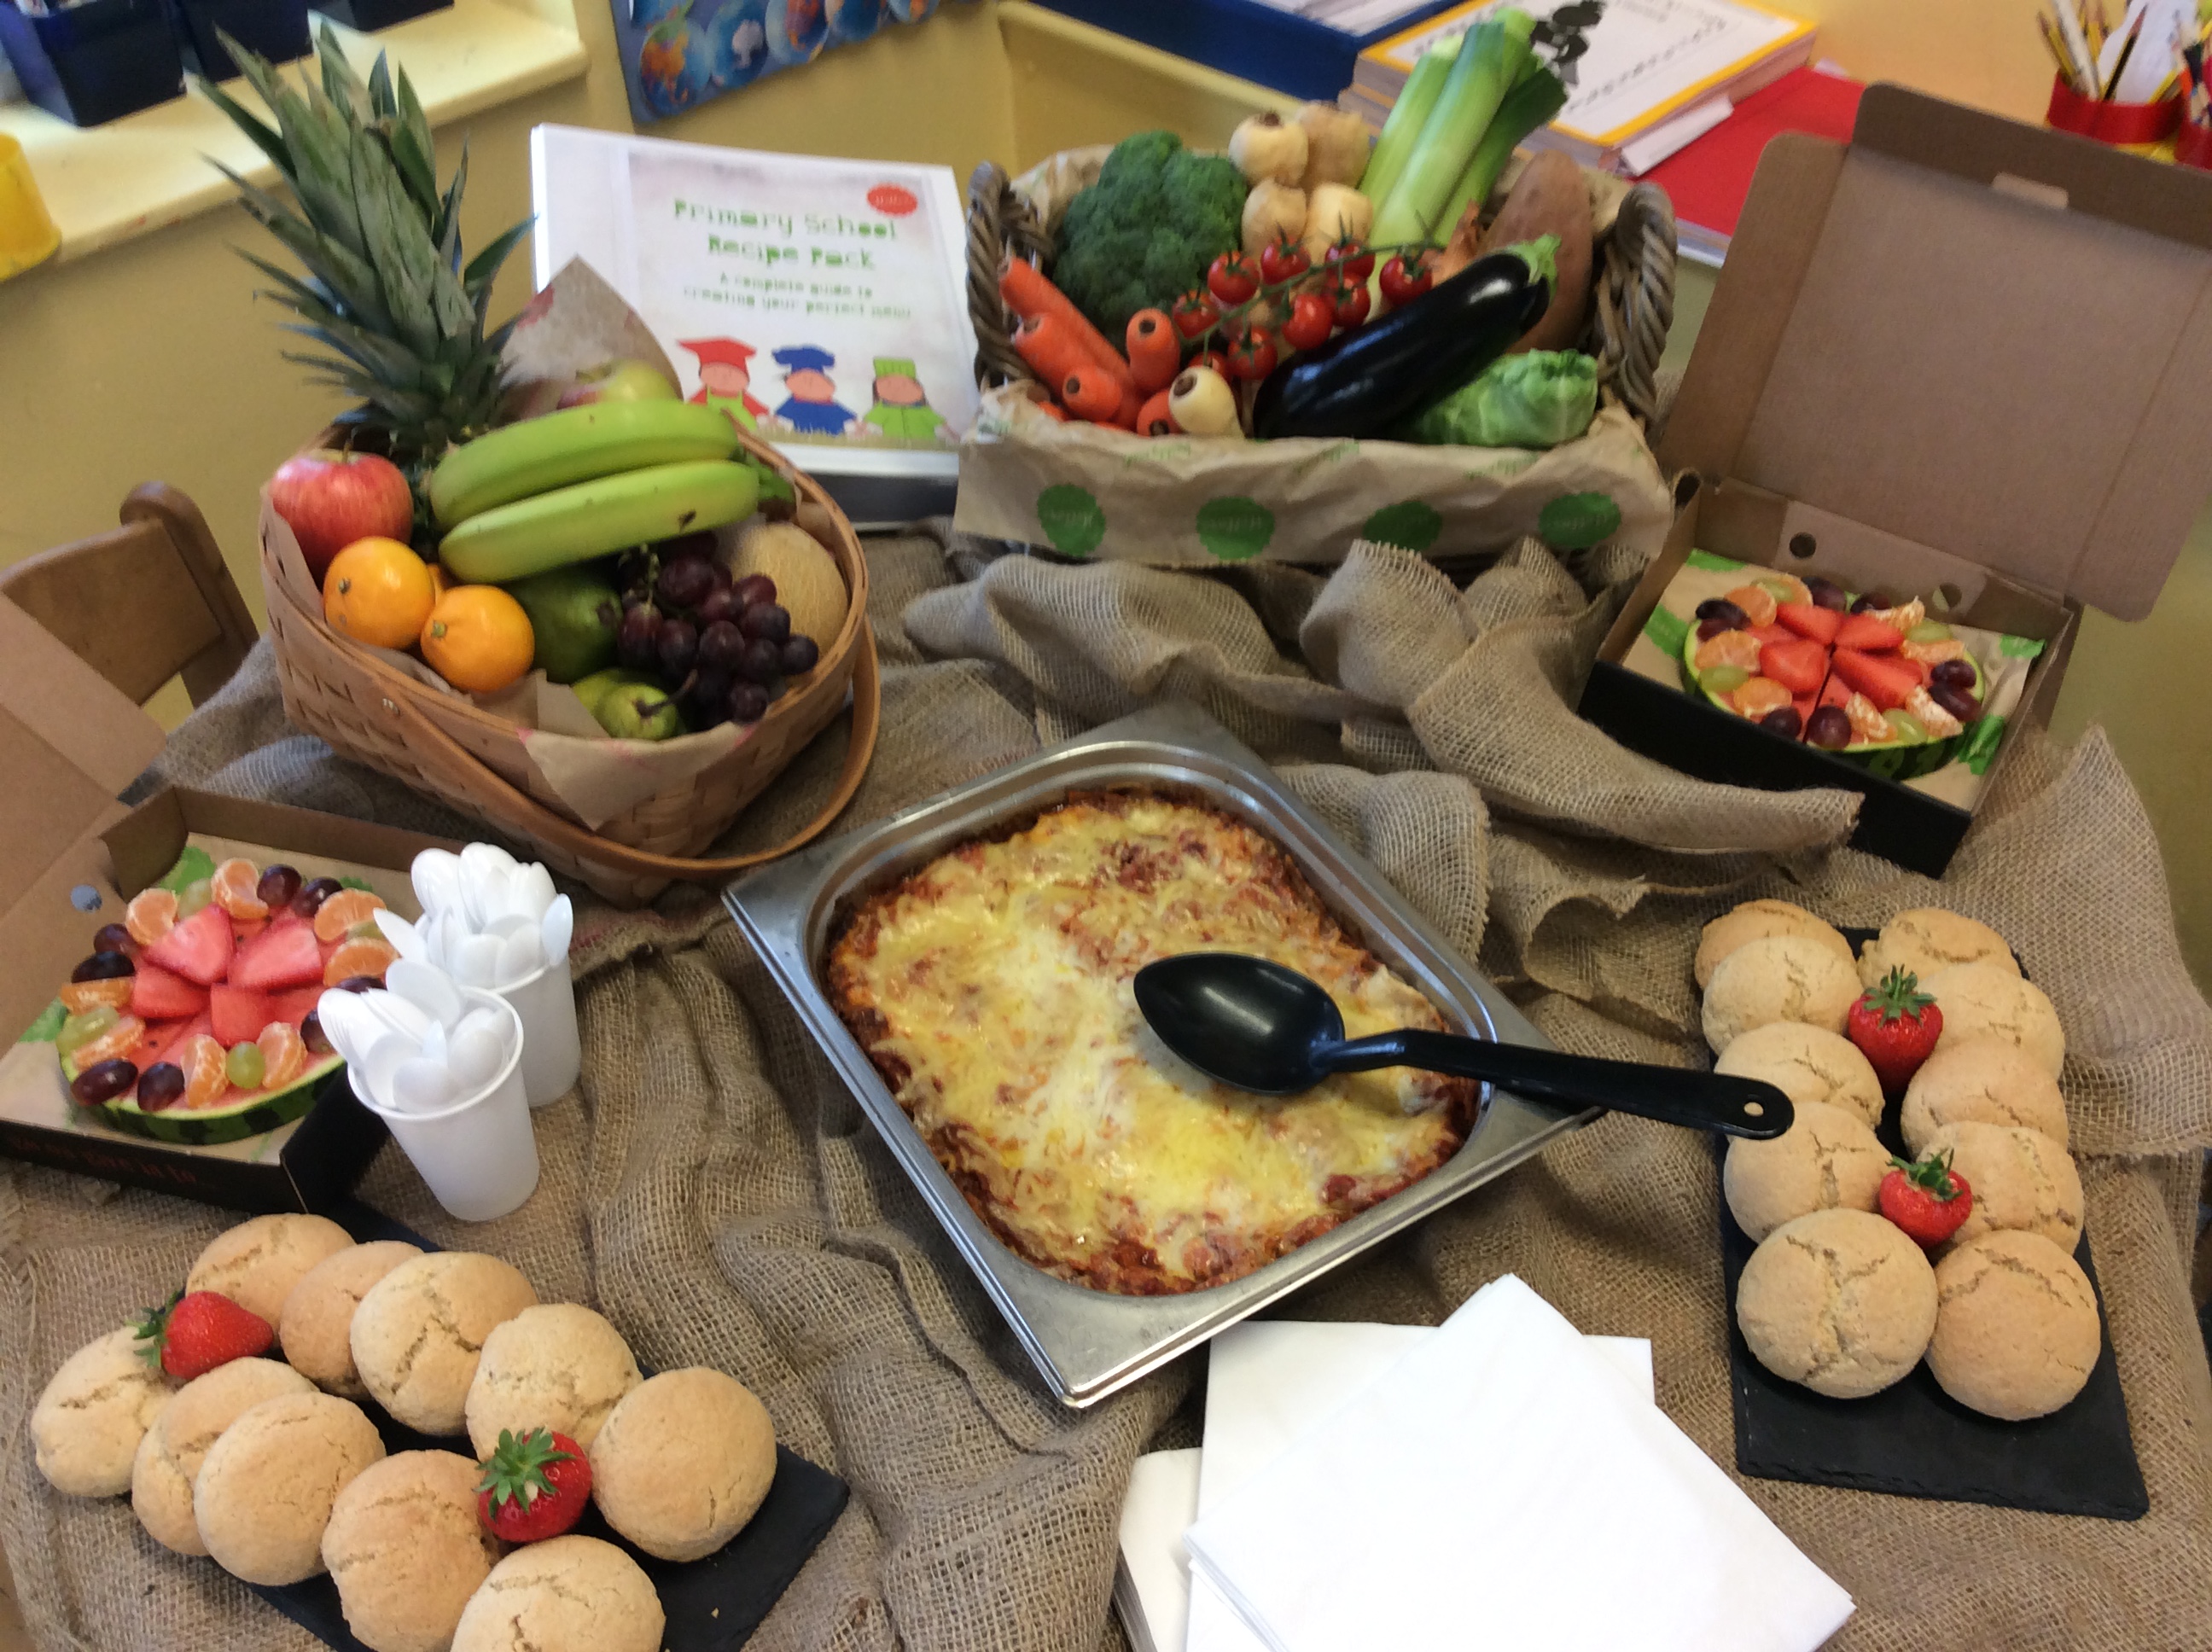 A taste of our primary school recipes